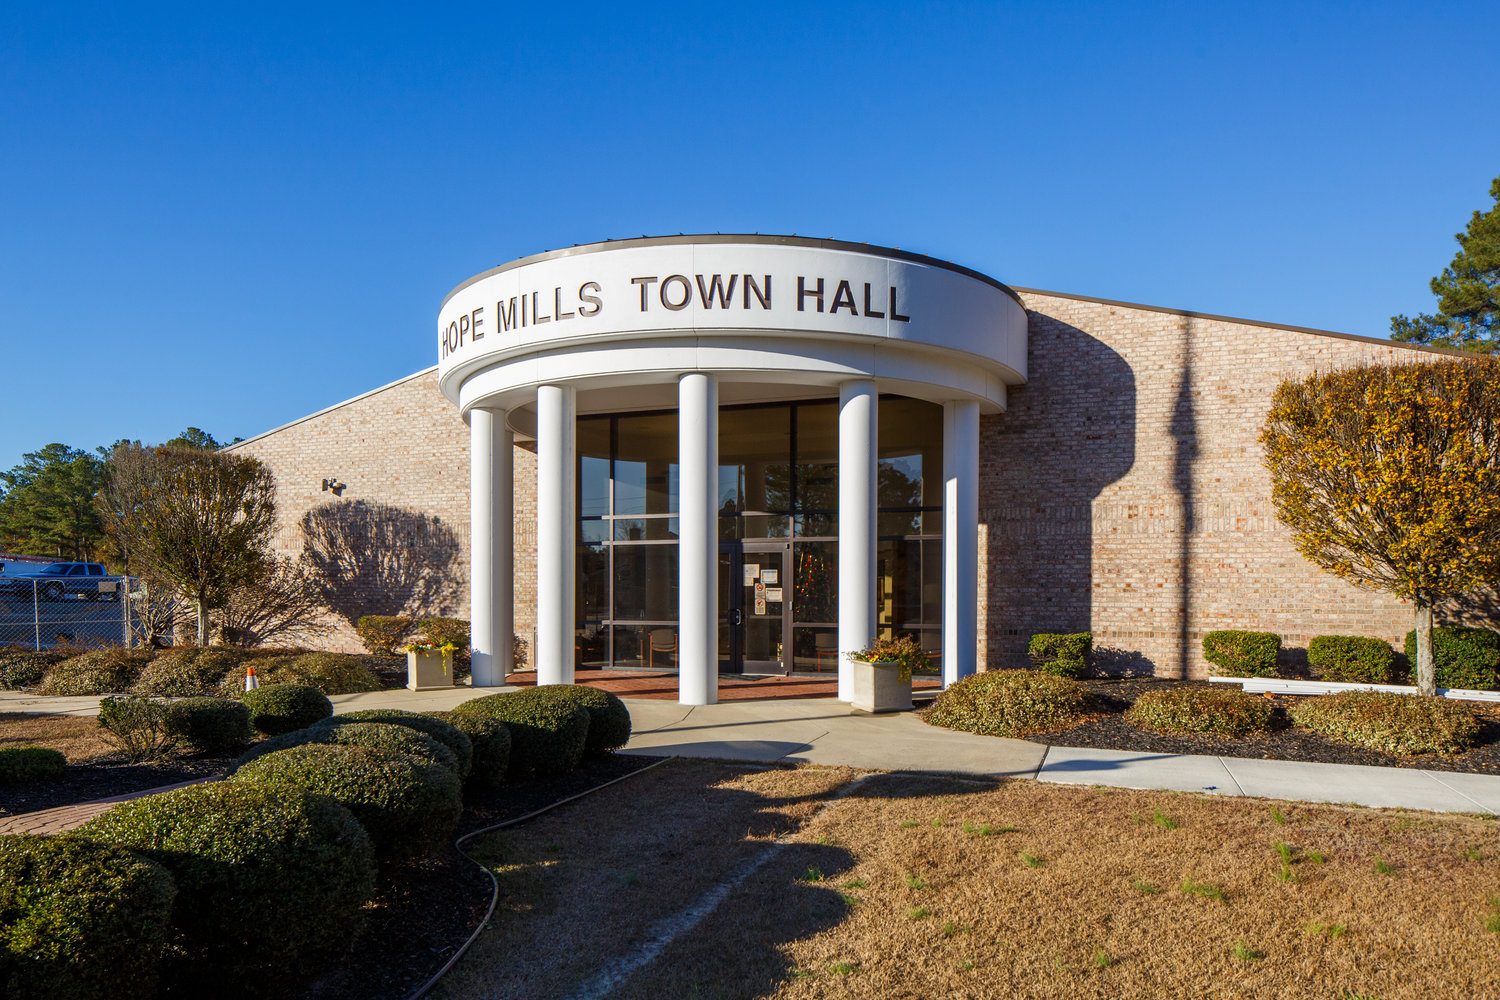 The Hope Mills Board of Commissioners is expected to hear several rezoning requests during its meeting Tuesday.